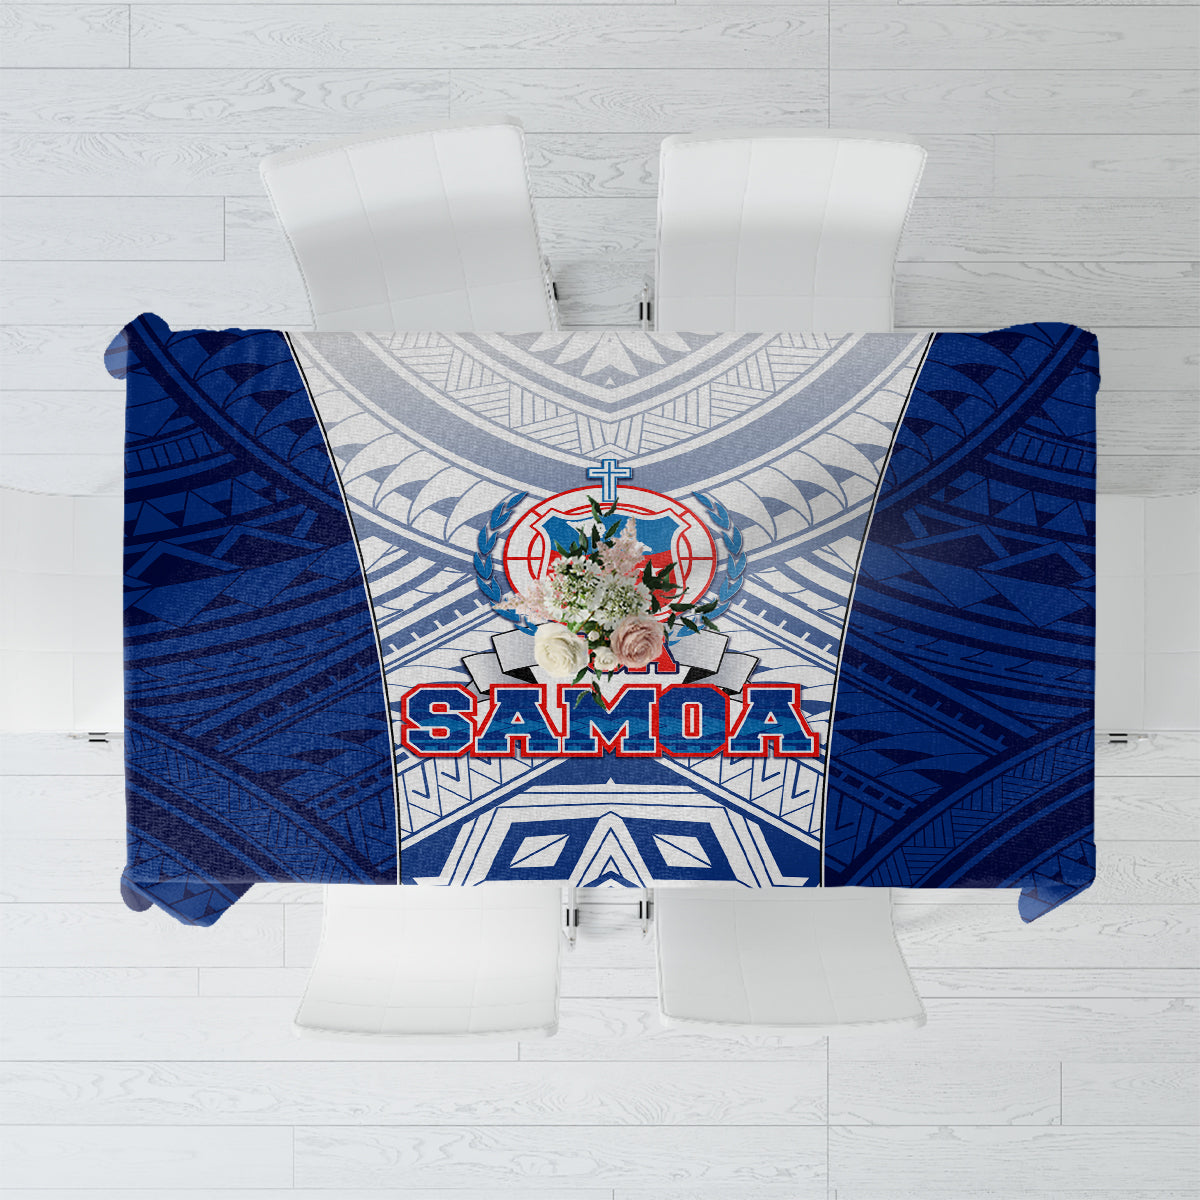 Samoa Rugby Tablecloth 2023 Pacific Championships Polynesian Pattern LT05 Blue - Polynesian Pride